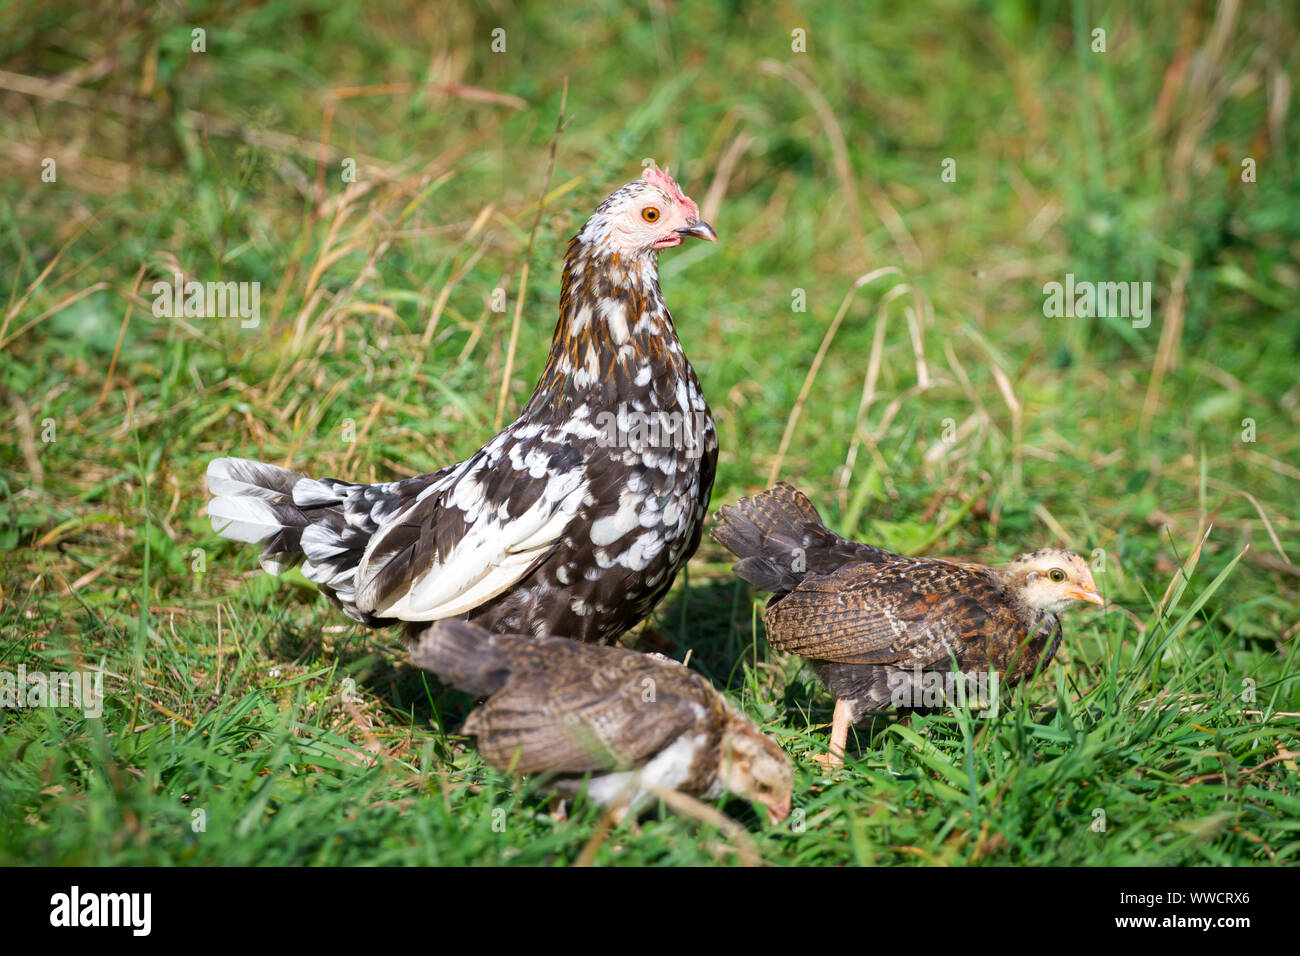 Stoapiperl/ Steinhendl, mother hen and fledglings - a critically endangered chicken breed from Austria Stock Photo